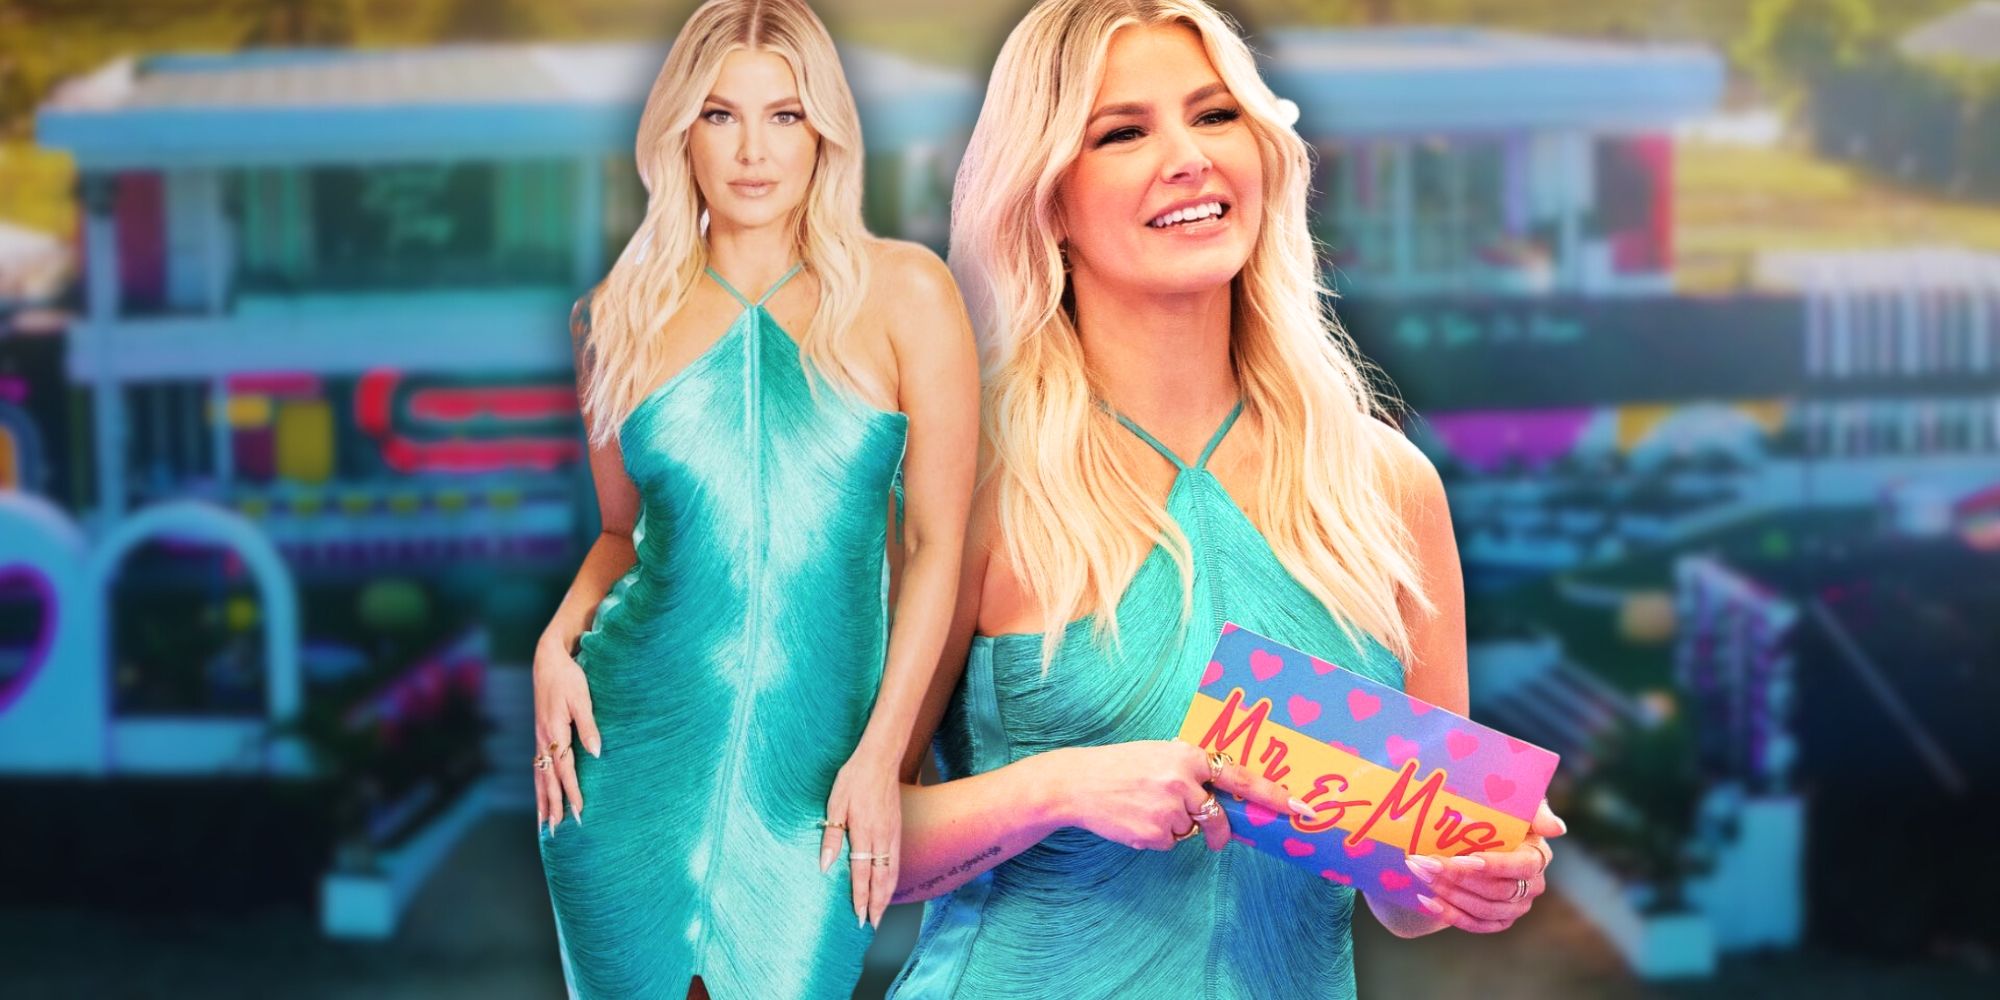 Montage of Vanderpump Rules’ Ariana Madix smiling on Love Island USA in a blue dress